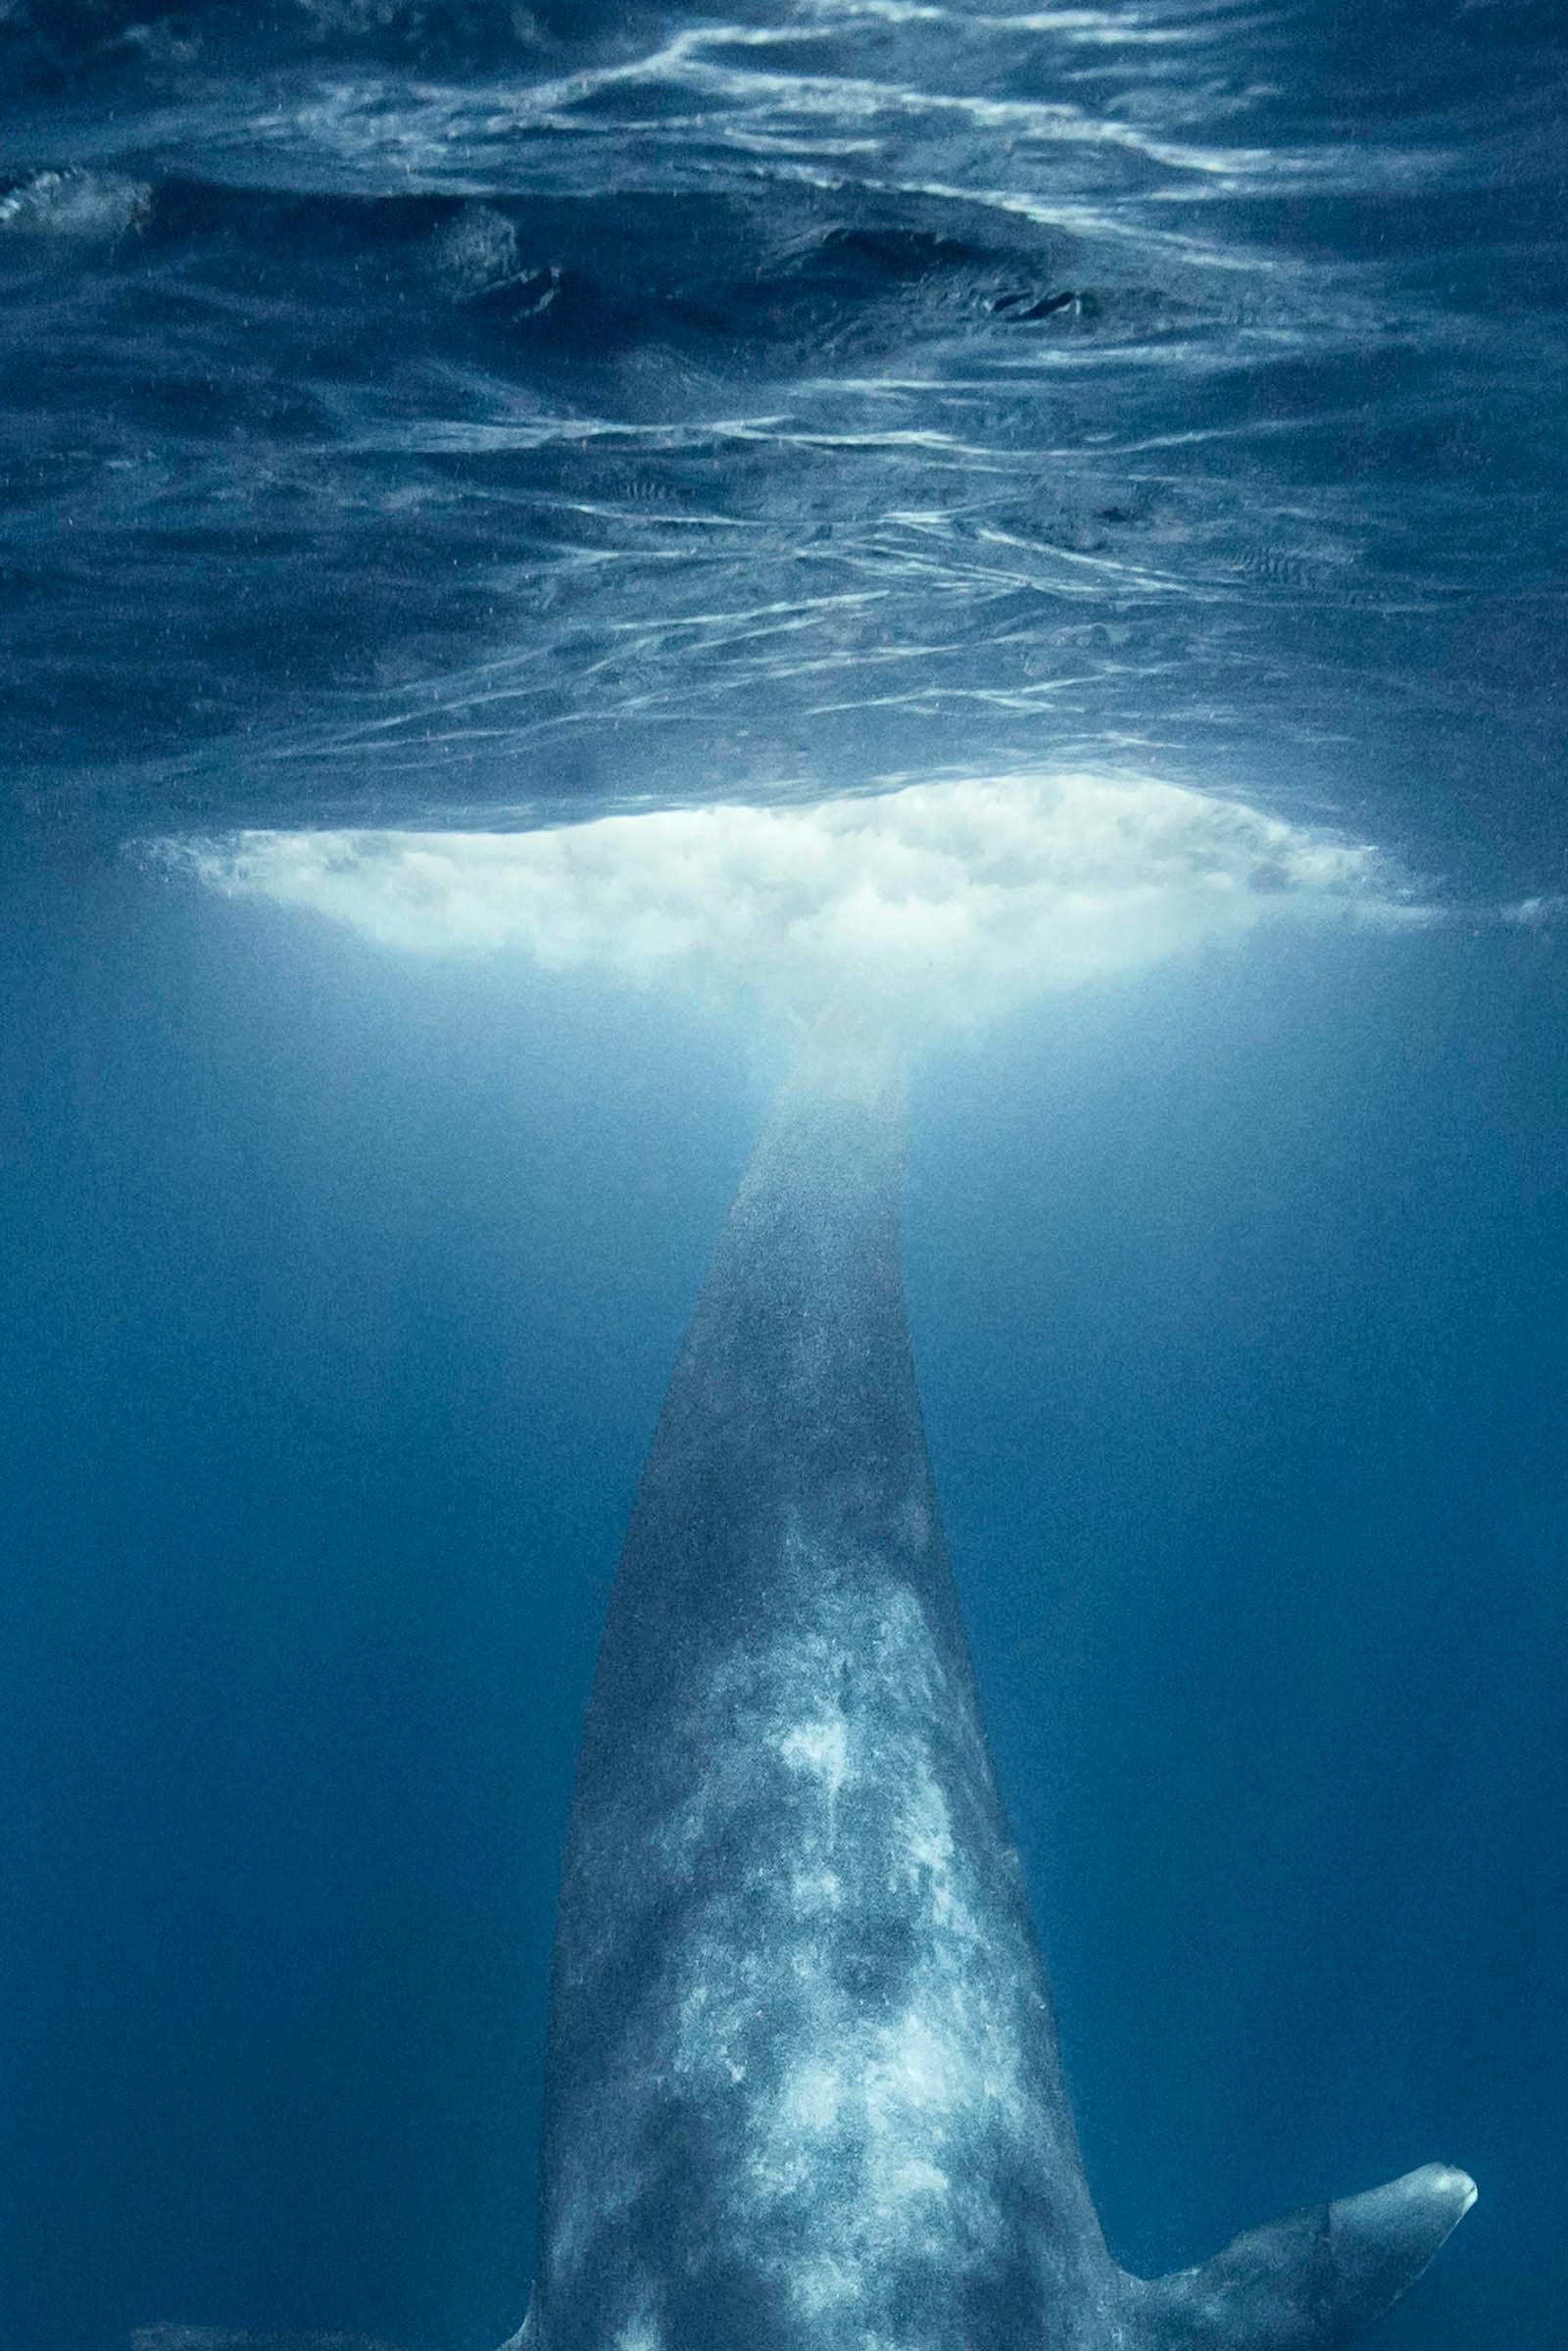 Dives Blue Whale - Signed limited nature fine art print, Color underwater photo - Contemporary Photograph by Olivier Borde